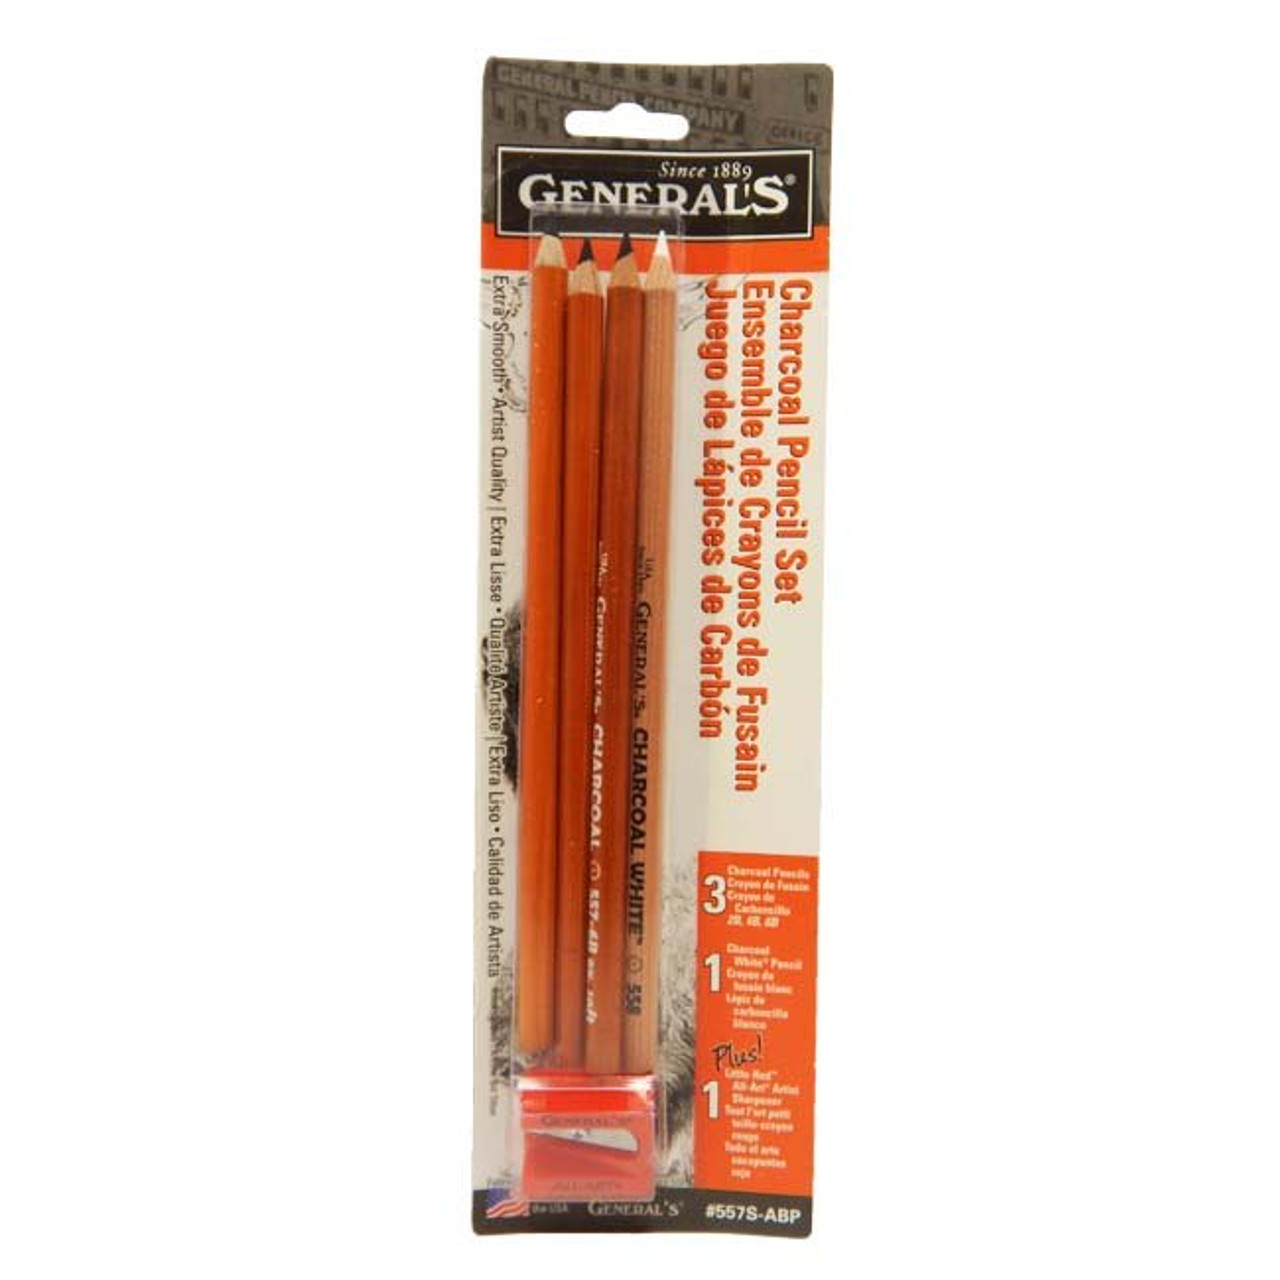 Galart Supplies Charcoal Pencils for Drawing Set with Organizer